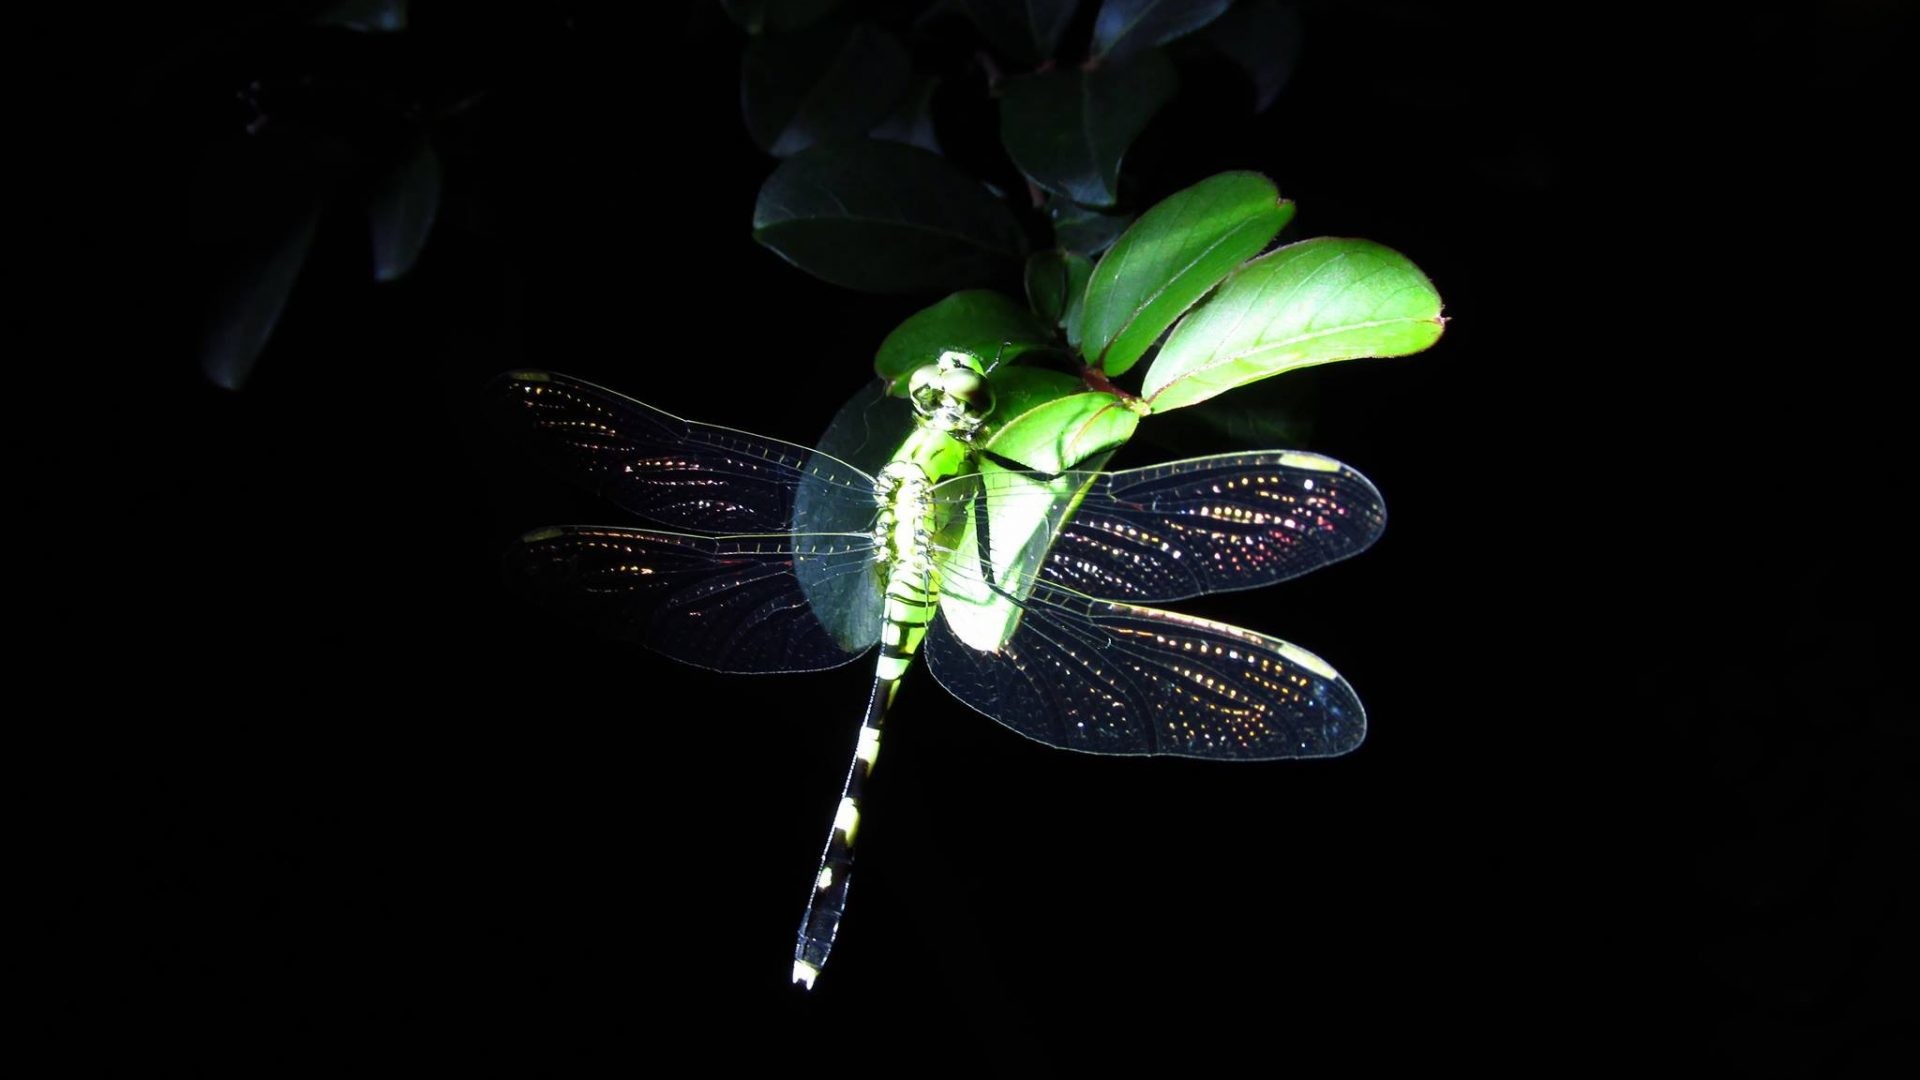 Dragonfly Photos Download The BEST Free Dragonfly Stock Photos  HD Images